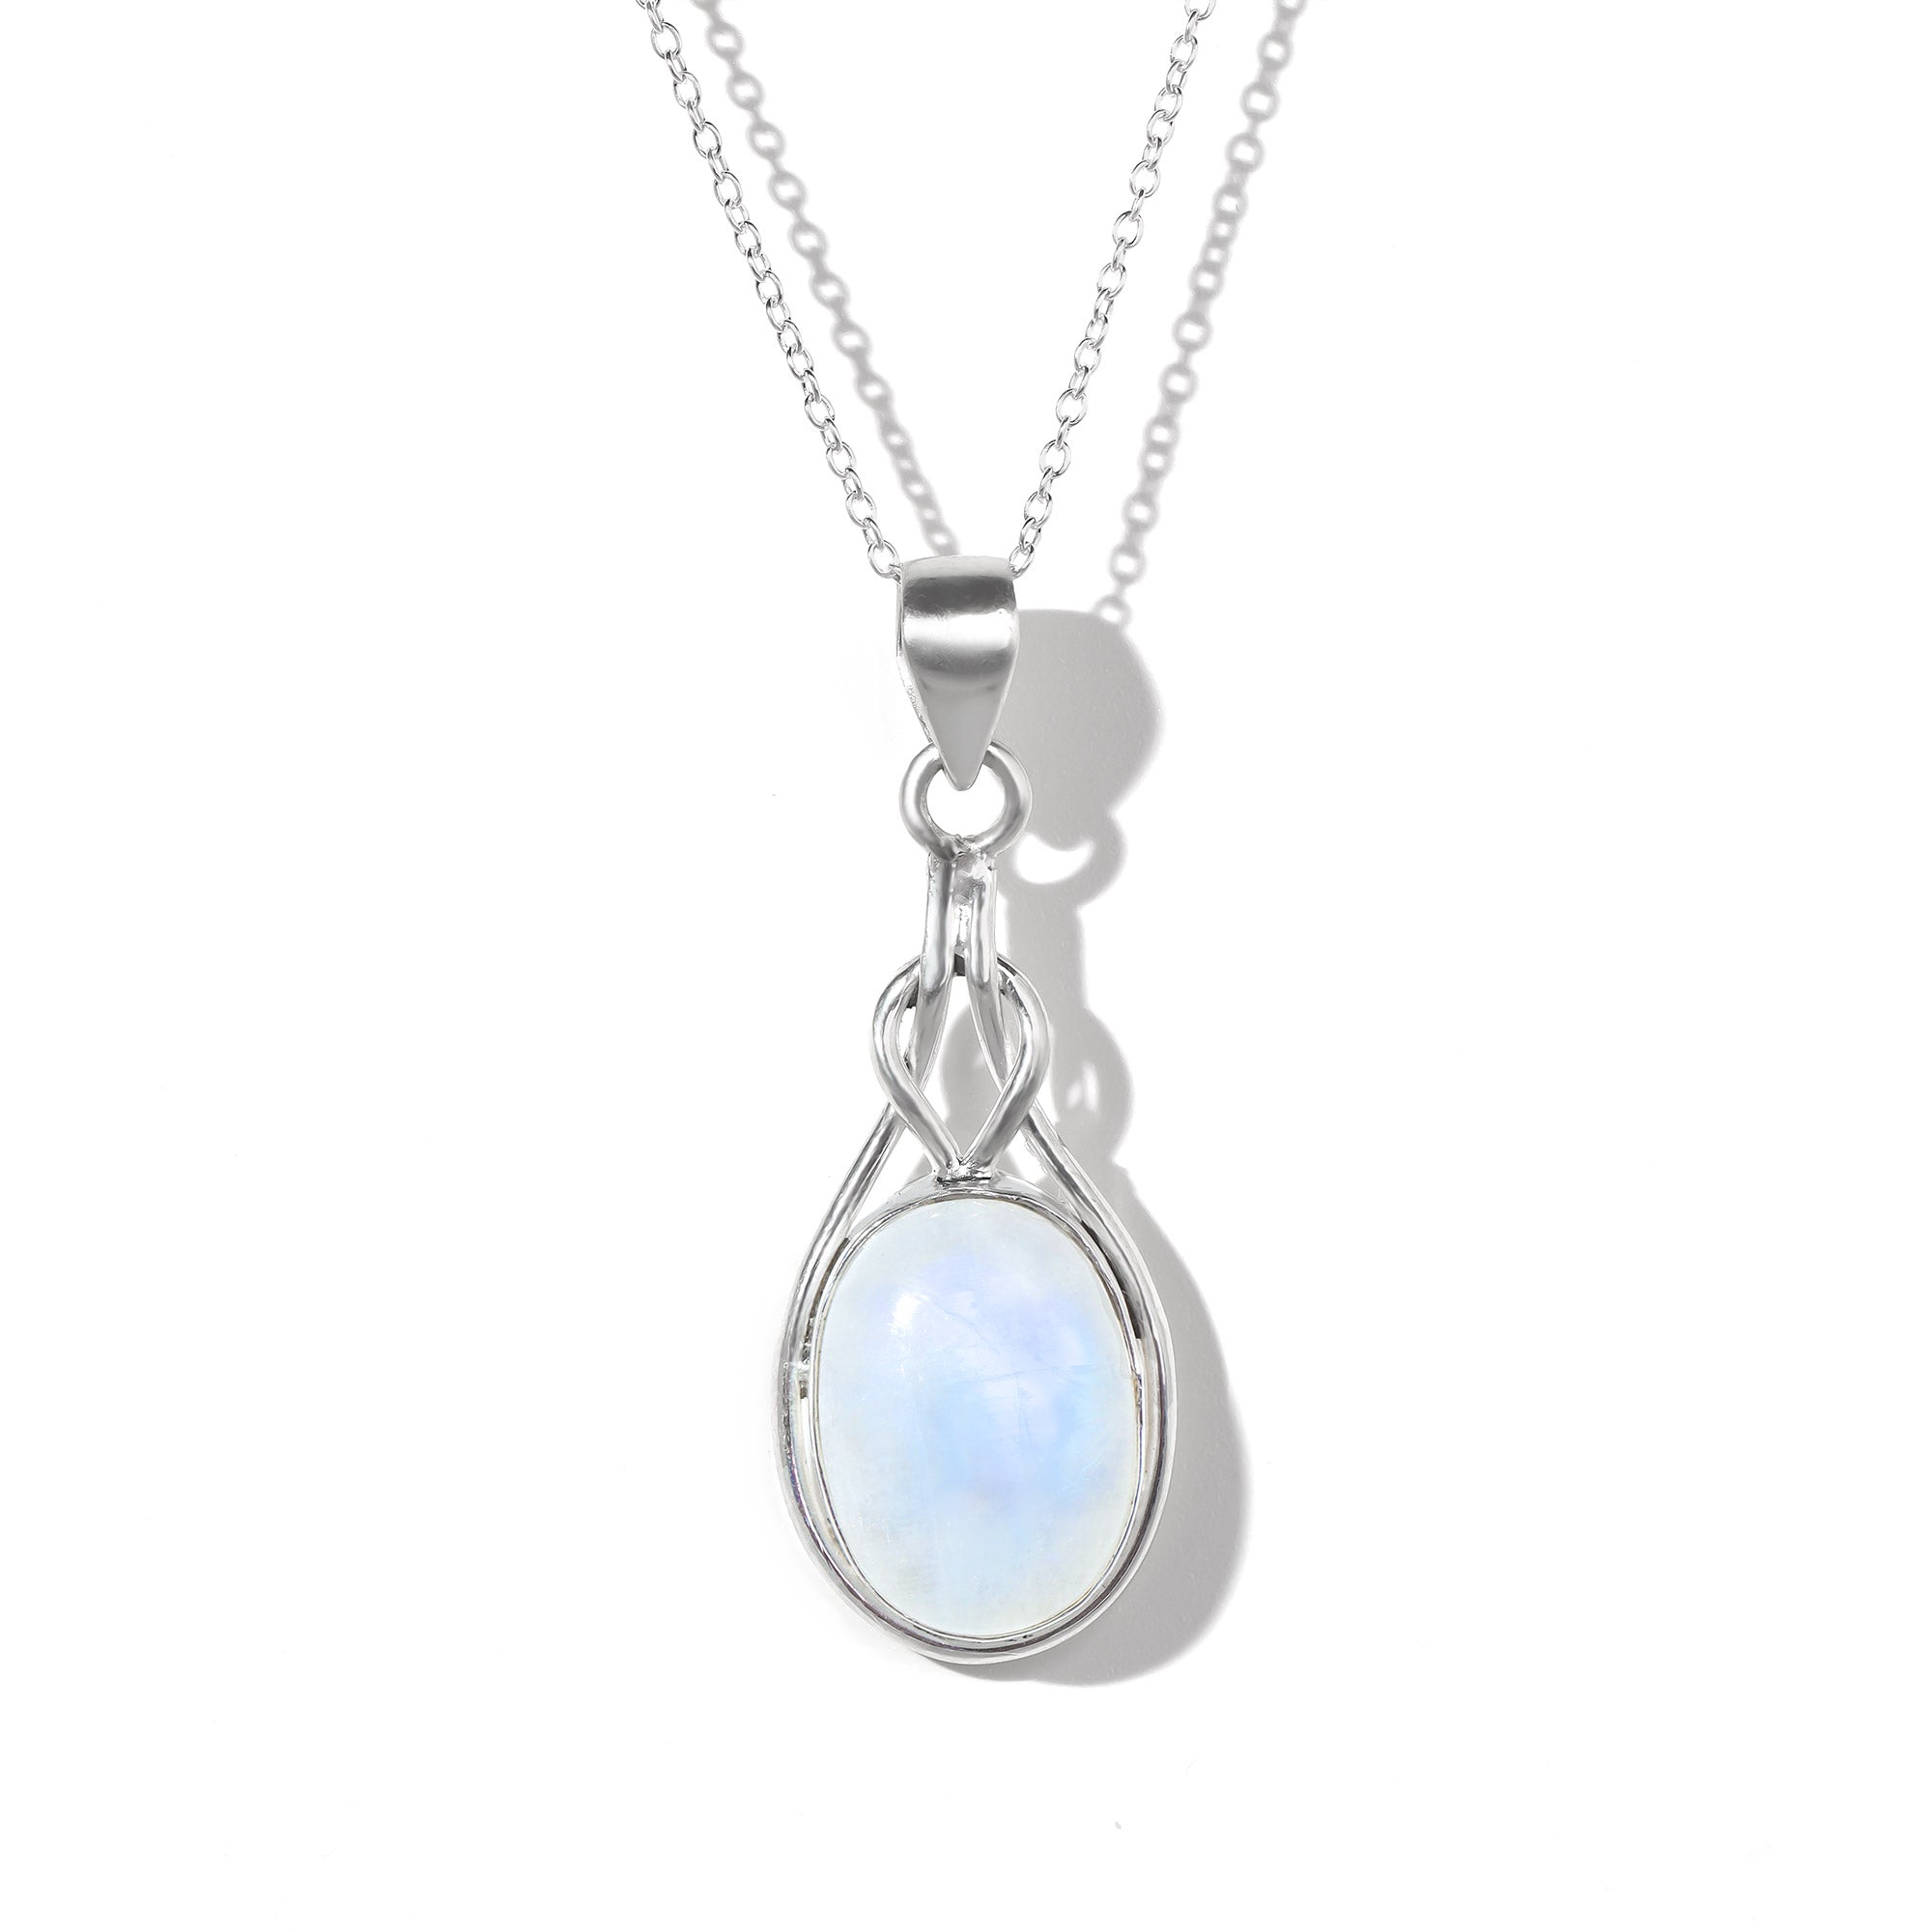 Unique Bargains 925 Sterling Silver Moonstone Necklace Chain for Women  Roese Gold Tone